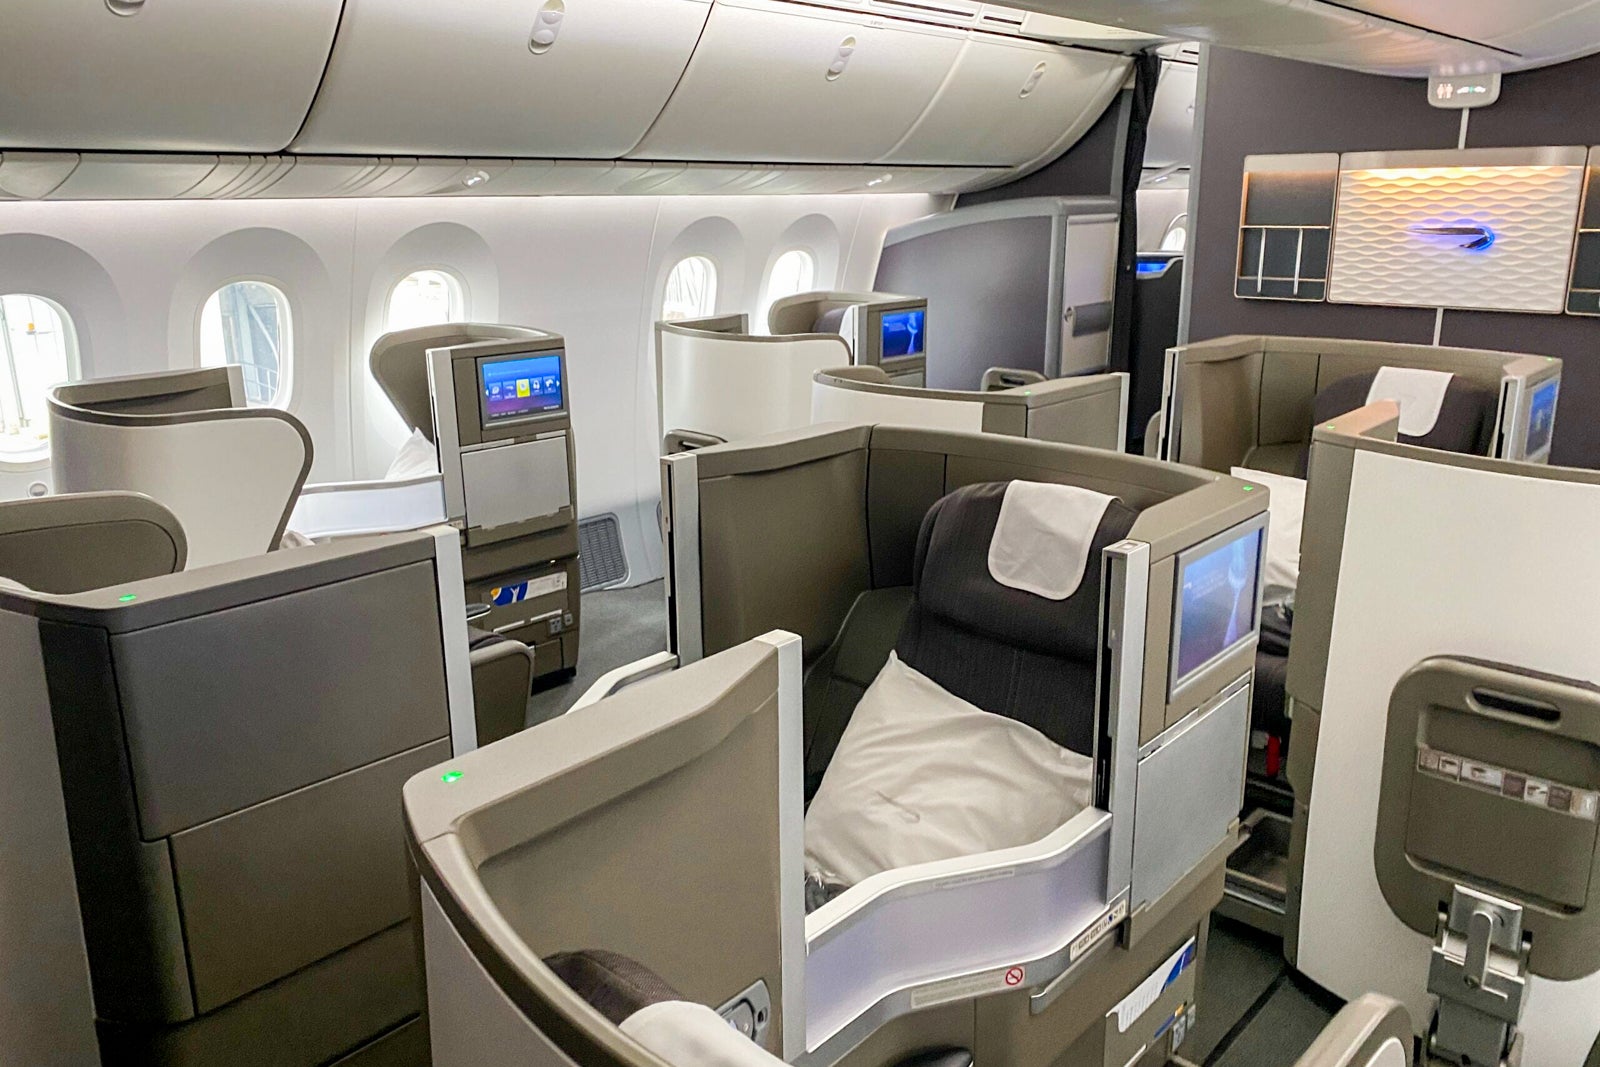 Review British Airways Club World business class on the 7879 from